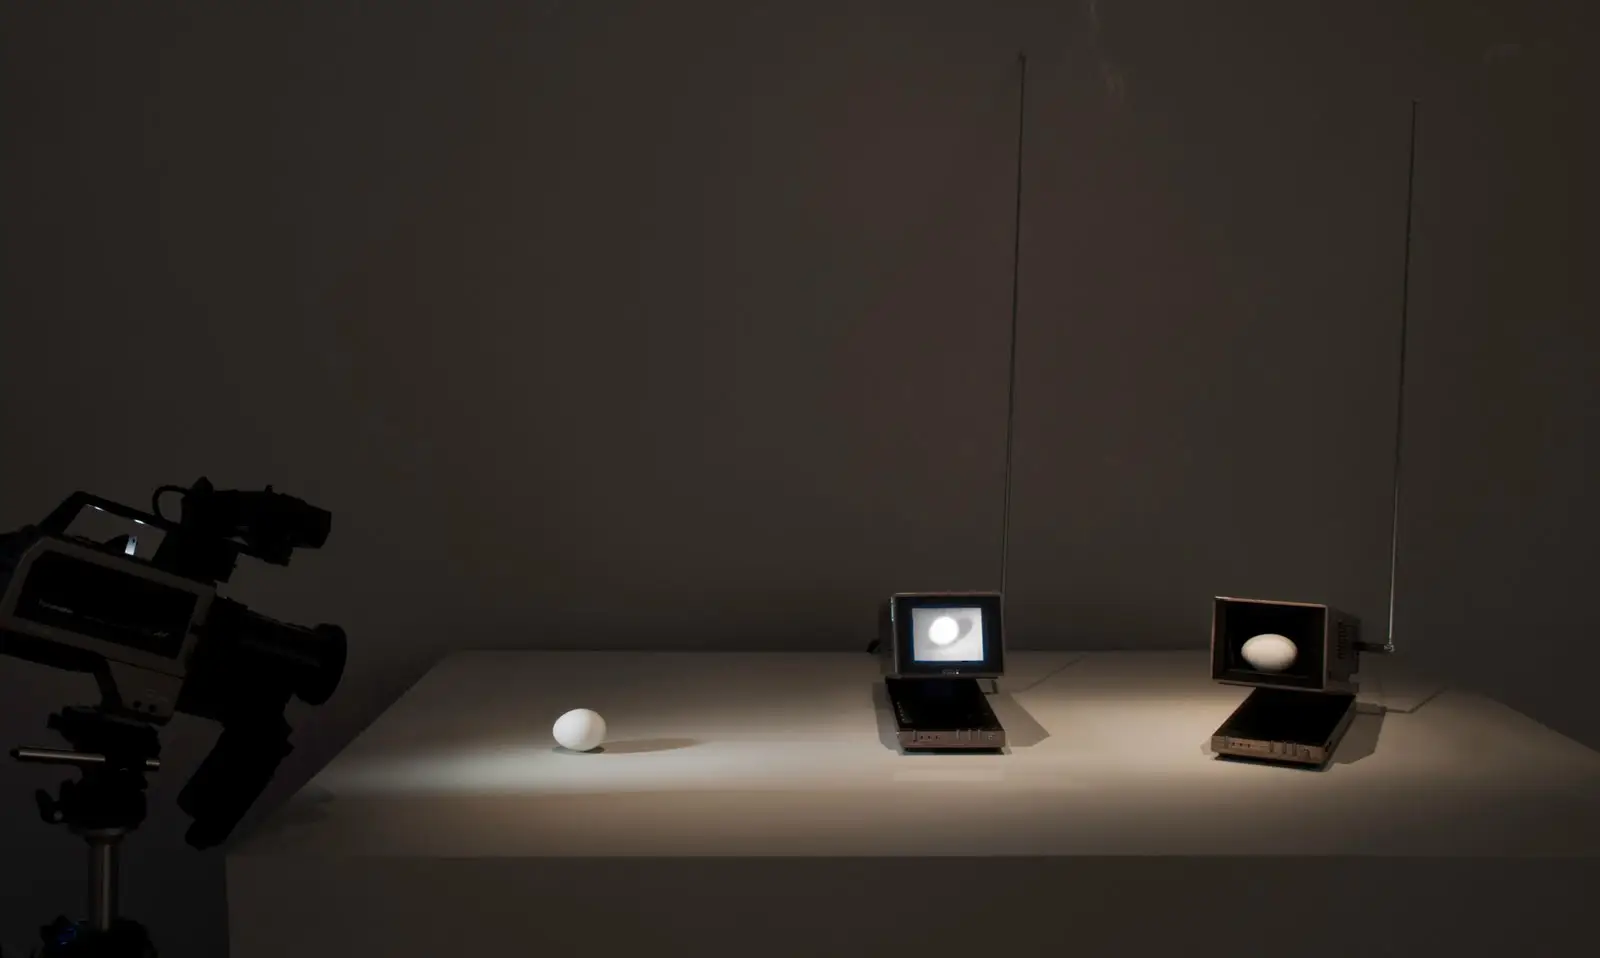 An egg on a table is filmed by a camera. Two small monitors beside the egg display its projection